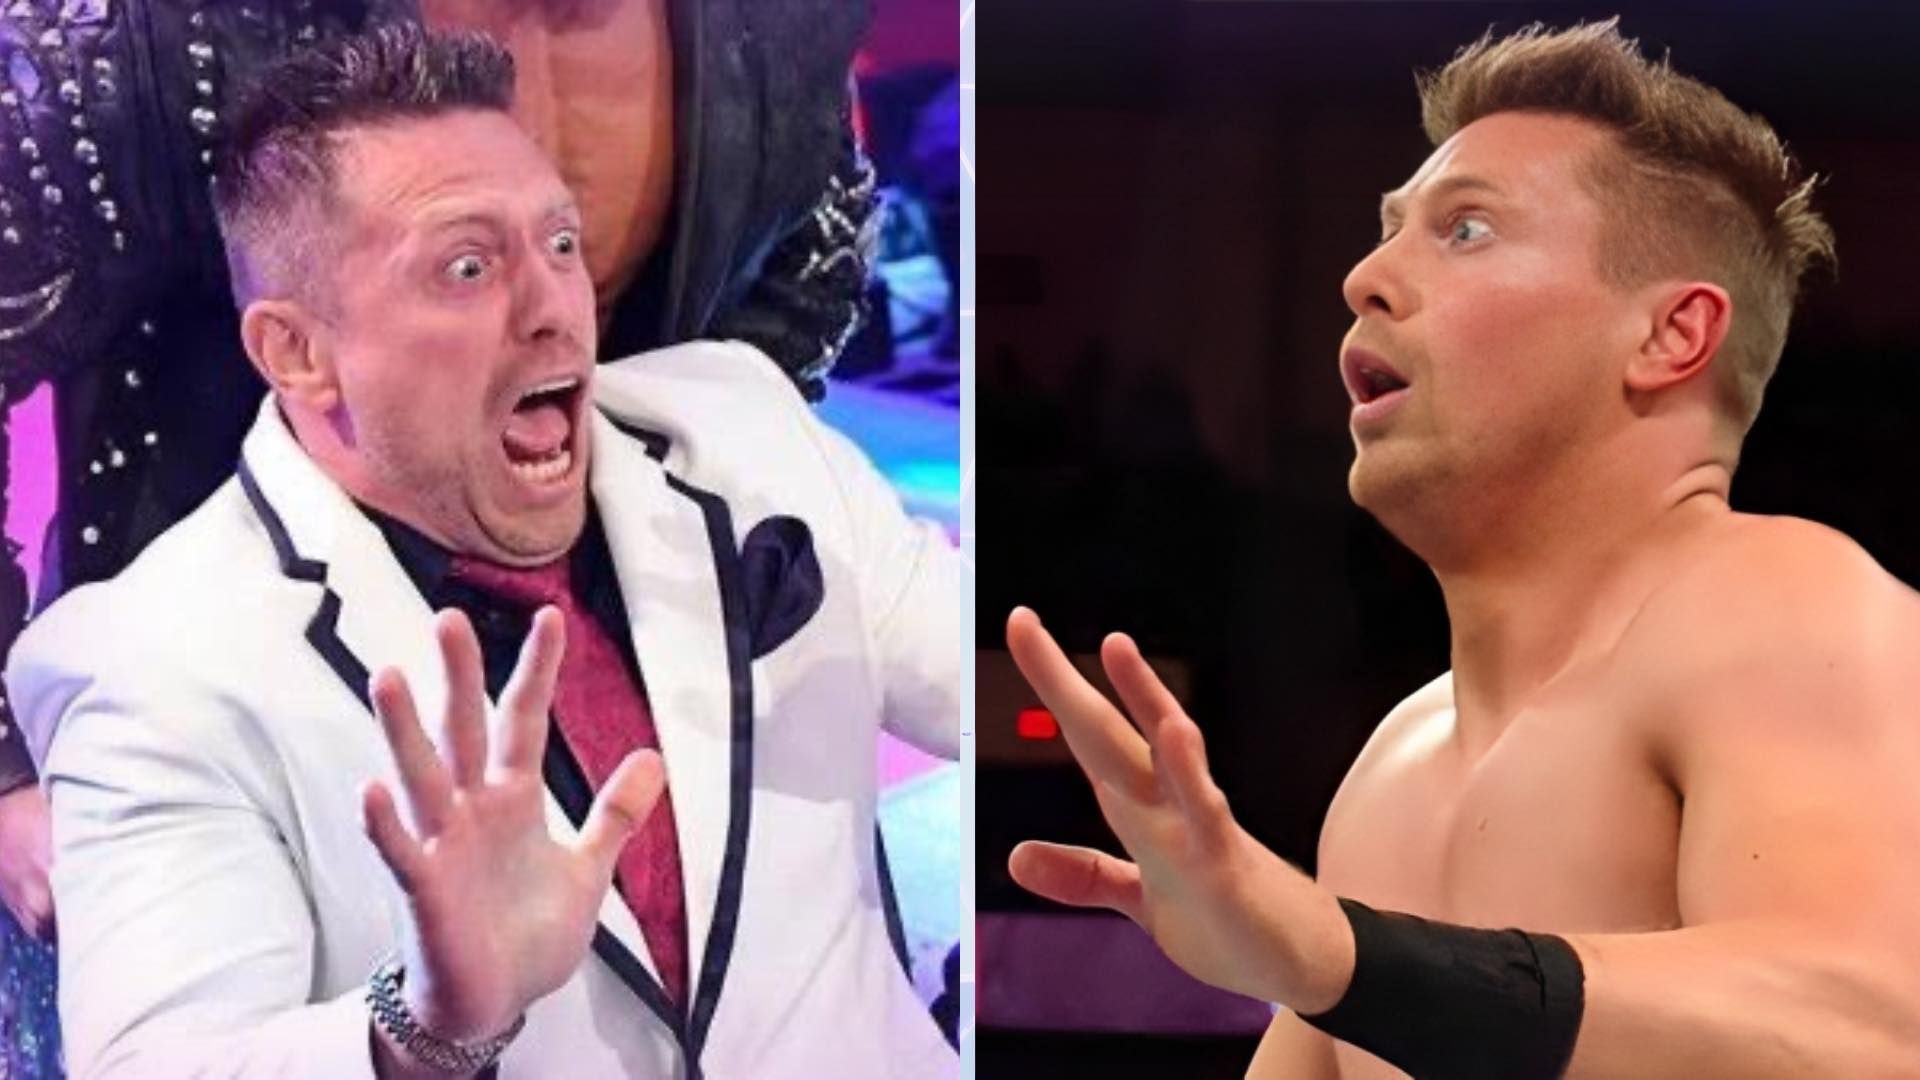 The Miz is a two-time WWE Grand Slam Champion.